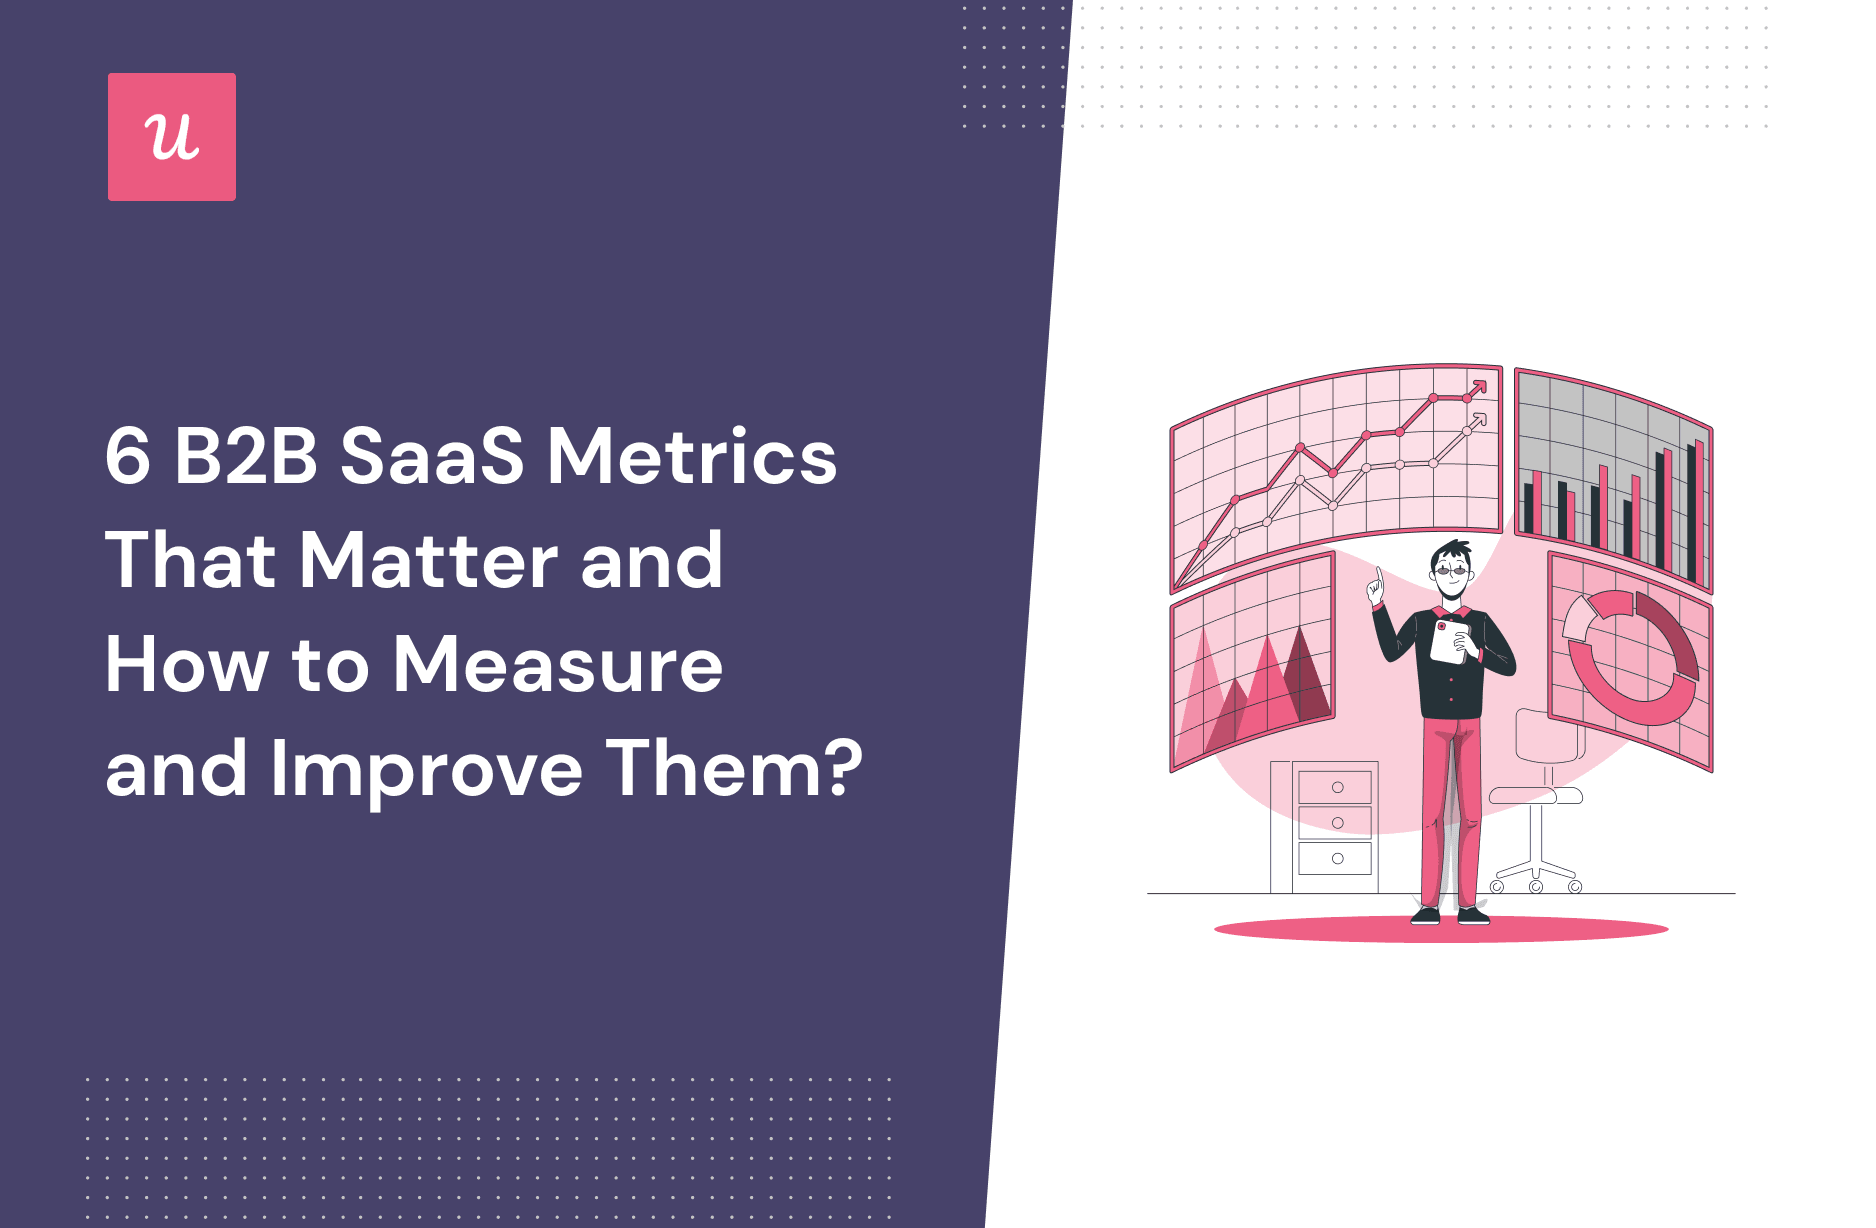 6 B2B SaaS Metrics That Matter and How To Measure and Improve Them?